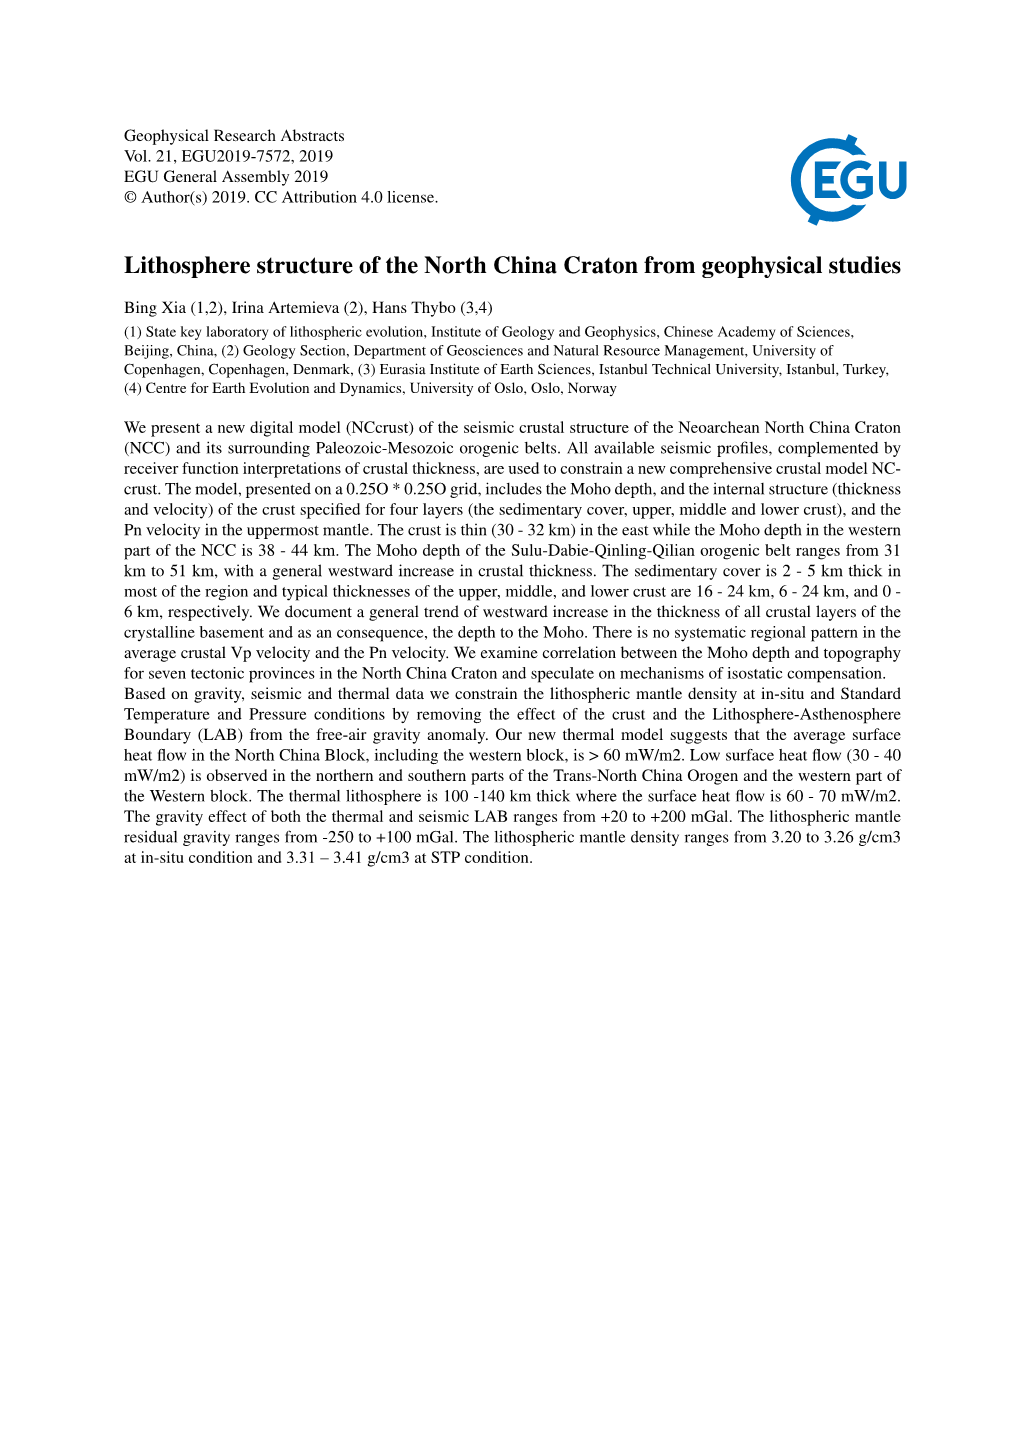 Lithosphere Structure of the North China Craton from Geophysical Studies